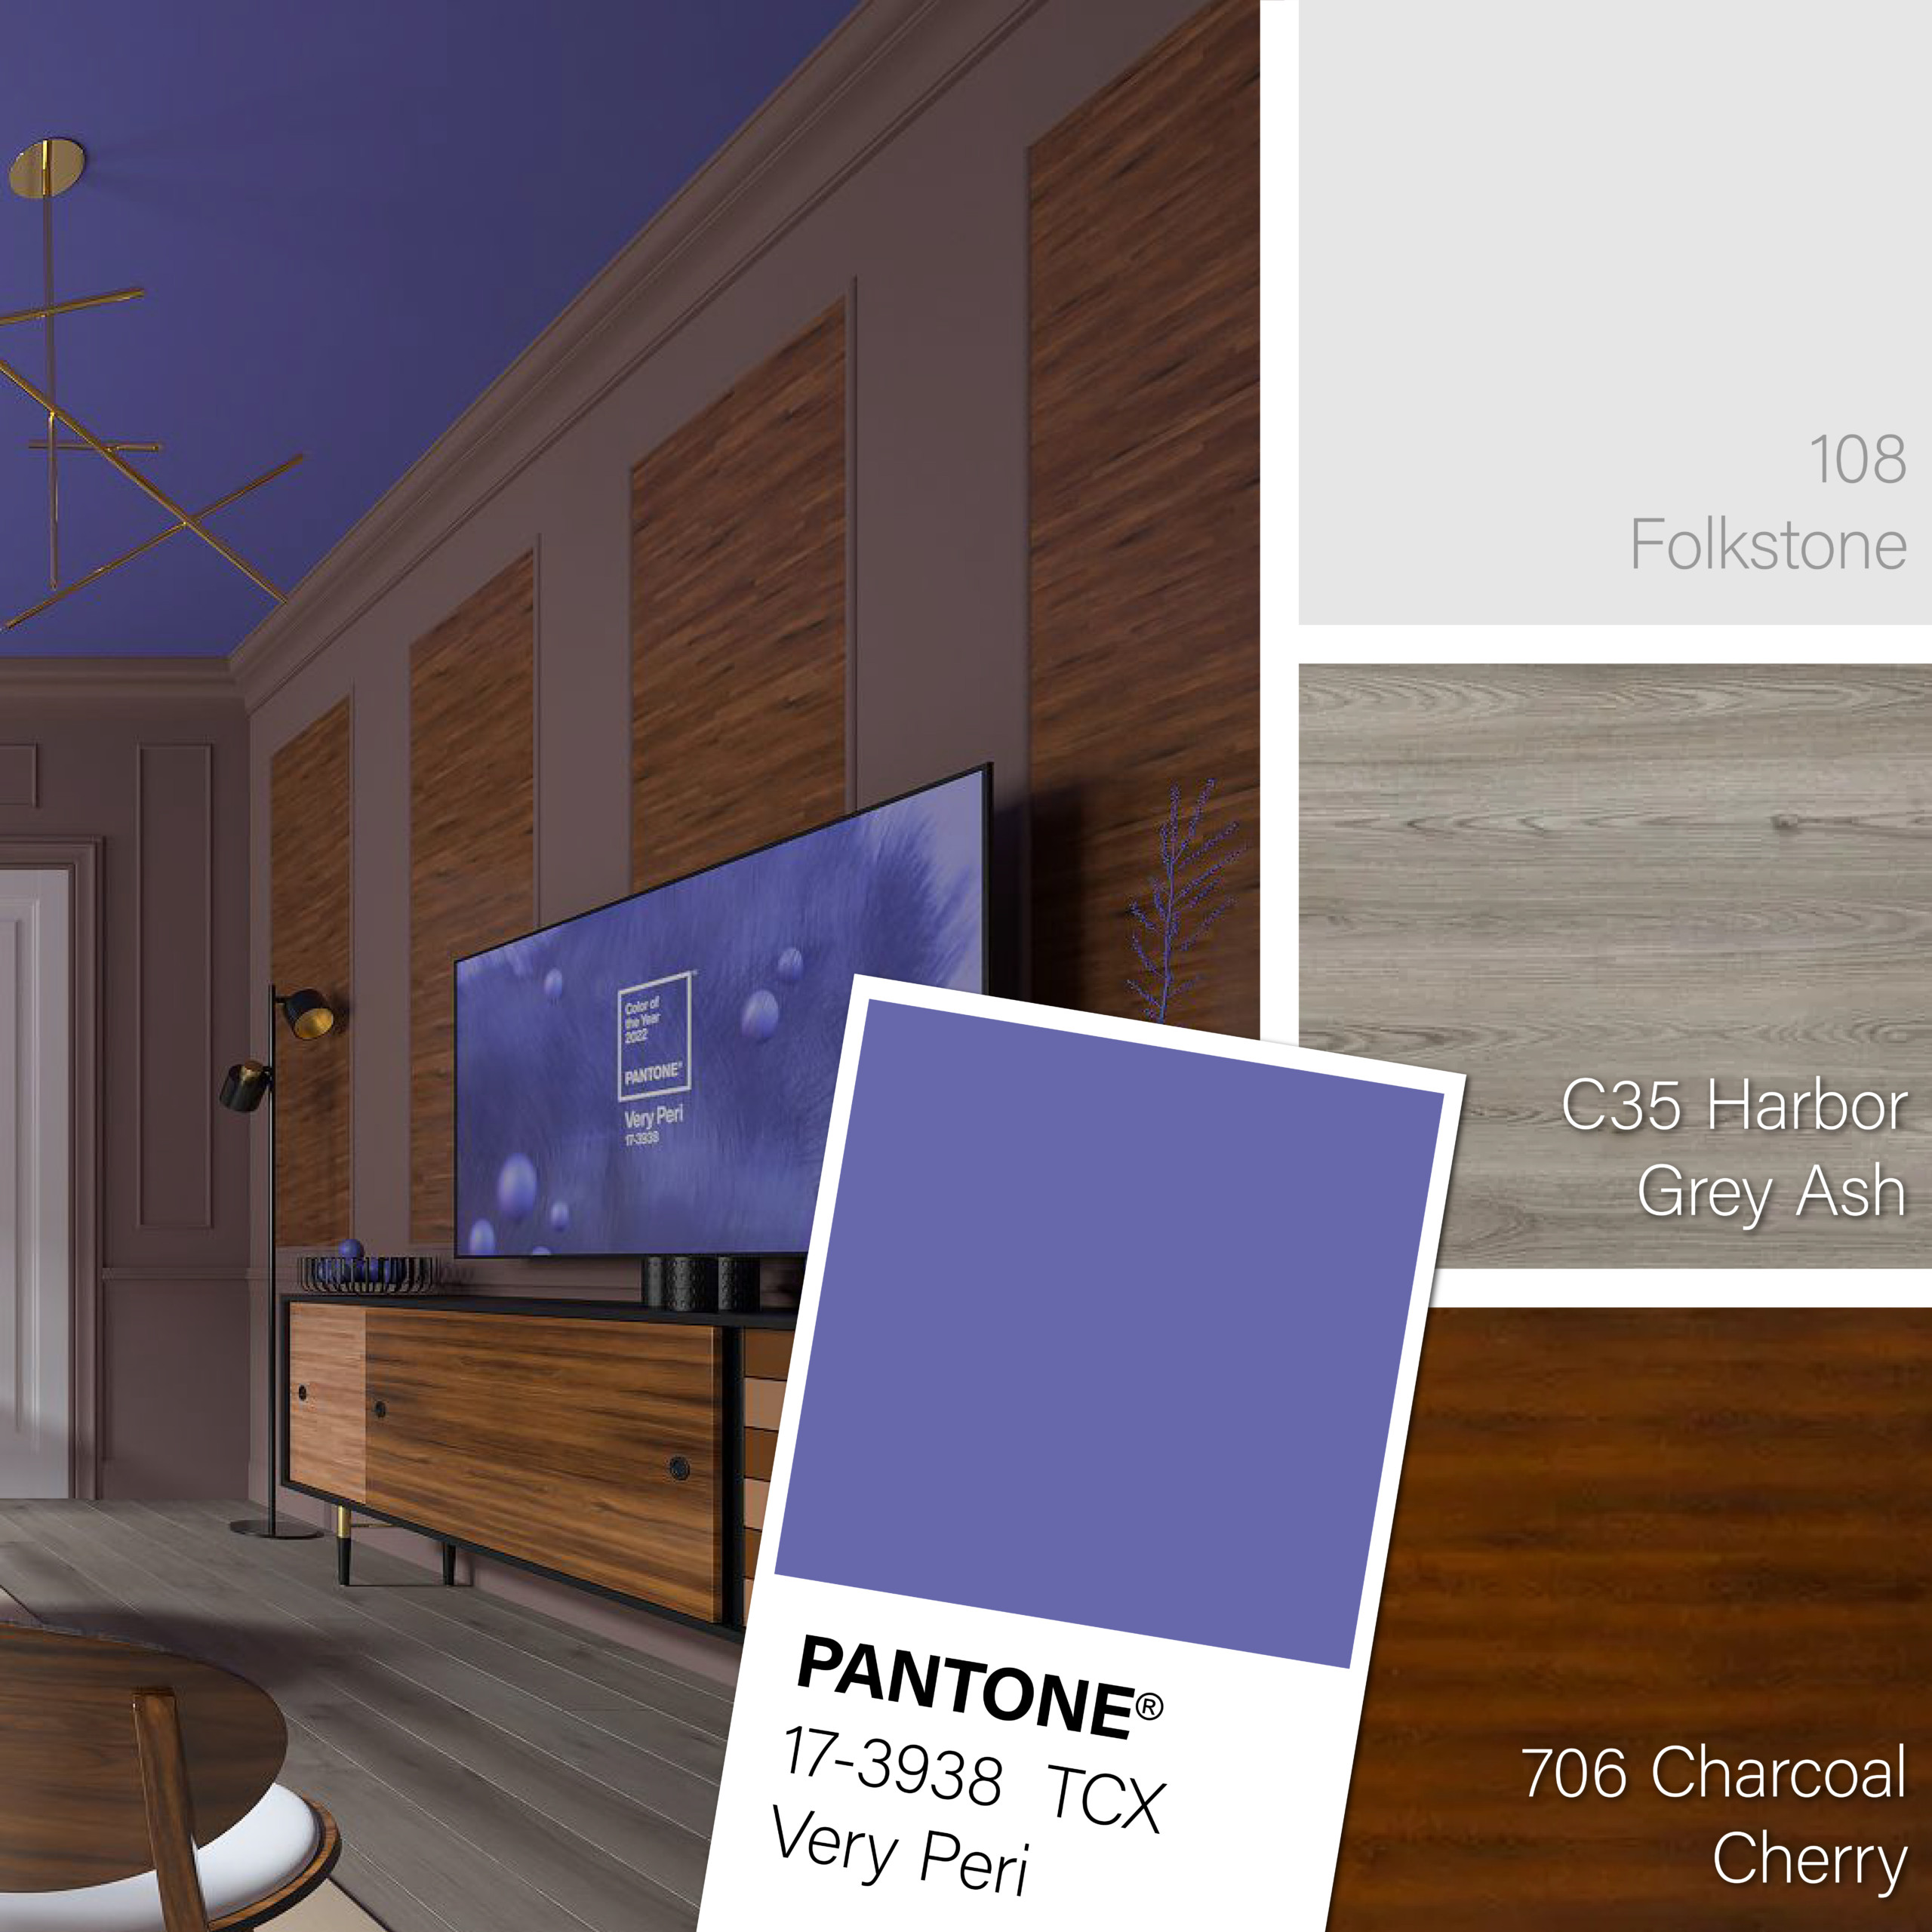 2022 Pantone Color Of The Year